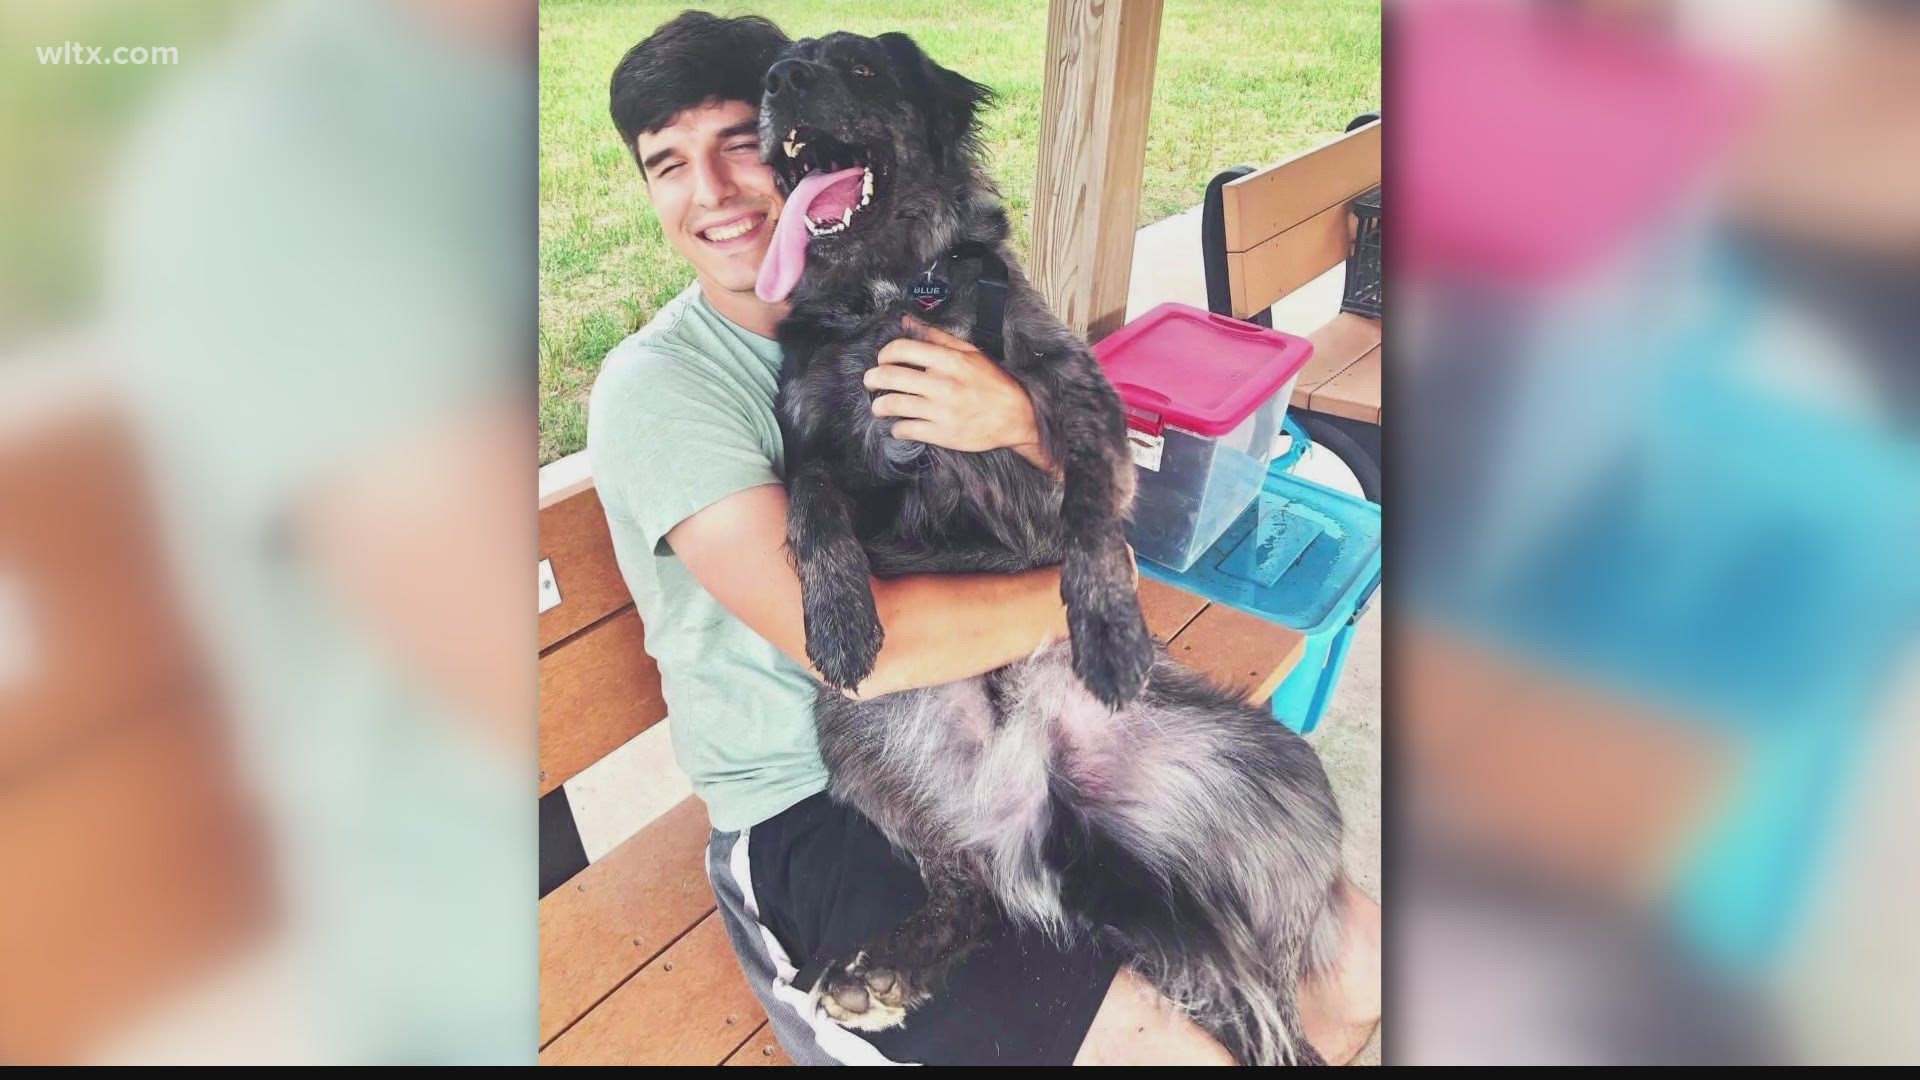 26-year-old Tucker Roundtree Morris was last seen October 26 by coworkers at his workplace, SC Pet Food Solutions, in Ward, SC.